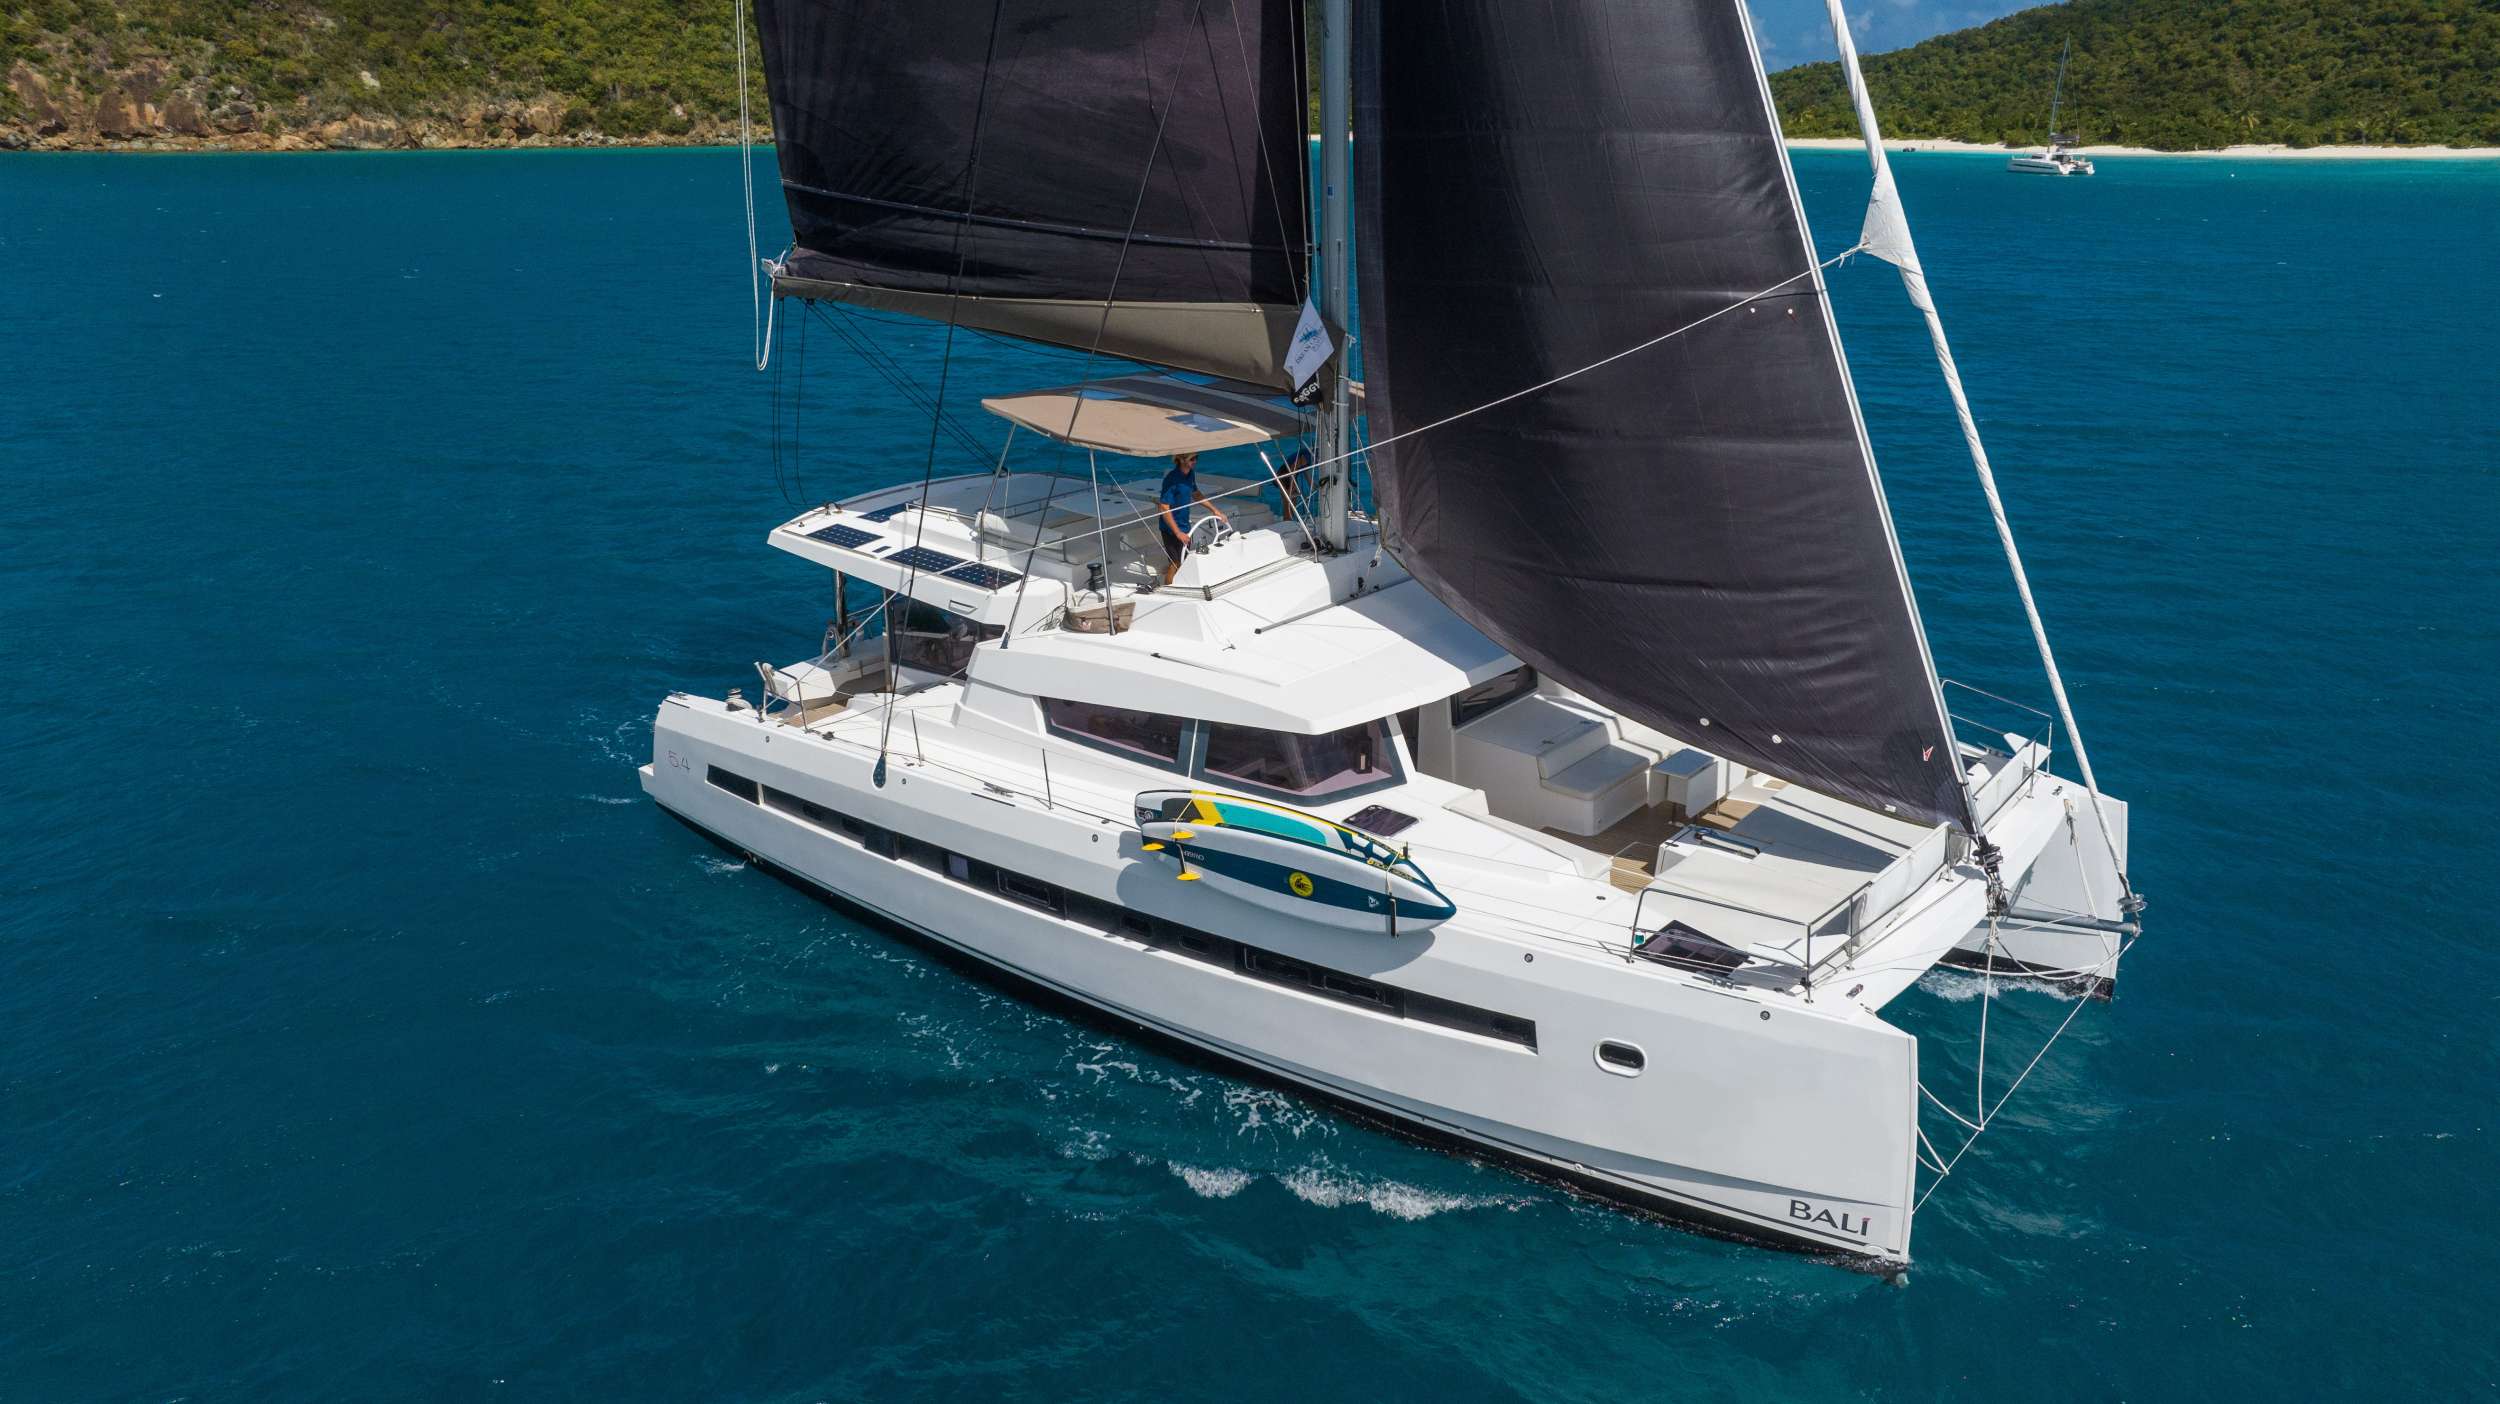 SUN DAZE 5.4 - Luxury yacht charter St Vincent and the Grenadines & Boat hire in Caribbean 1